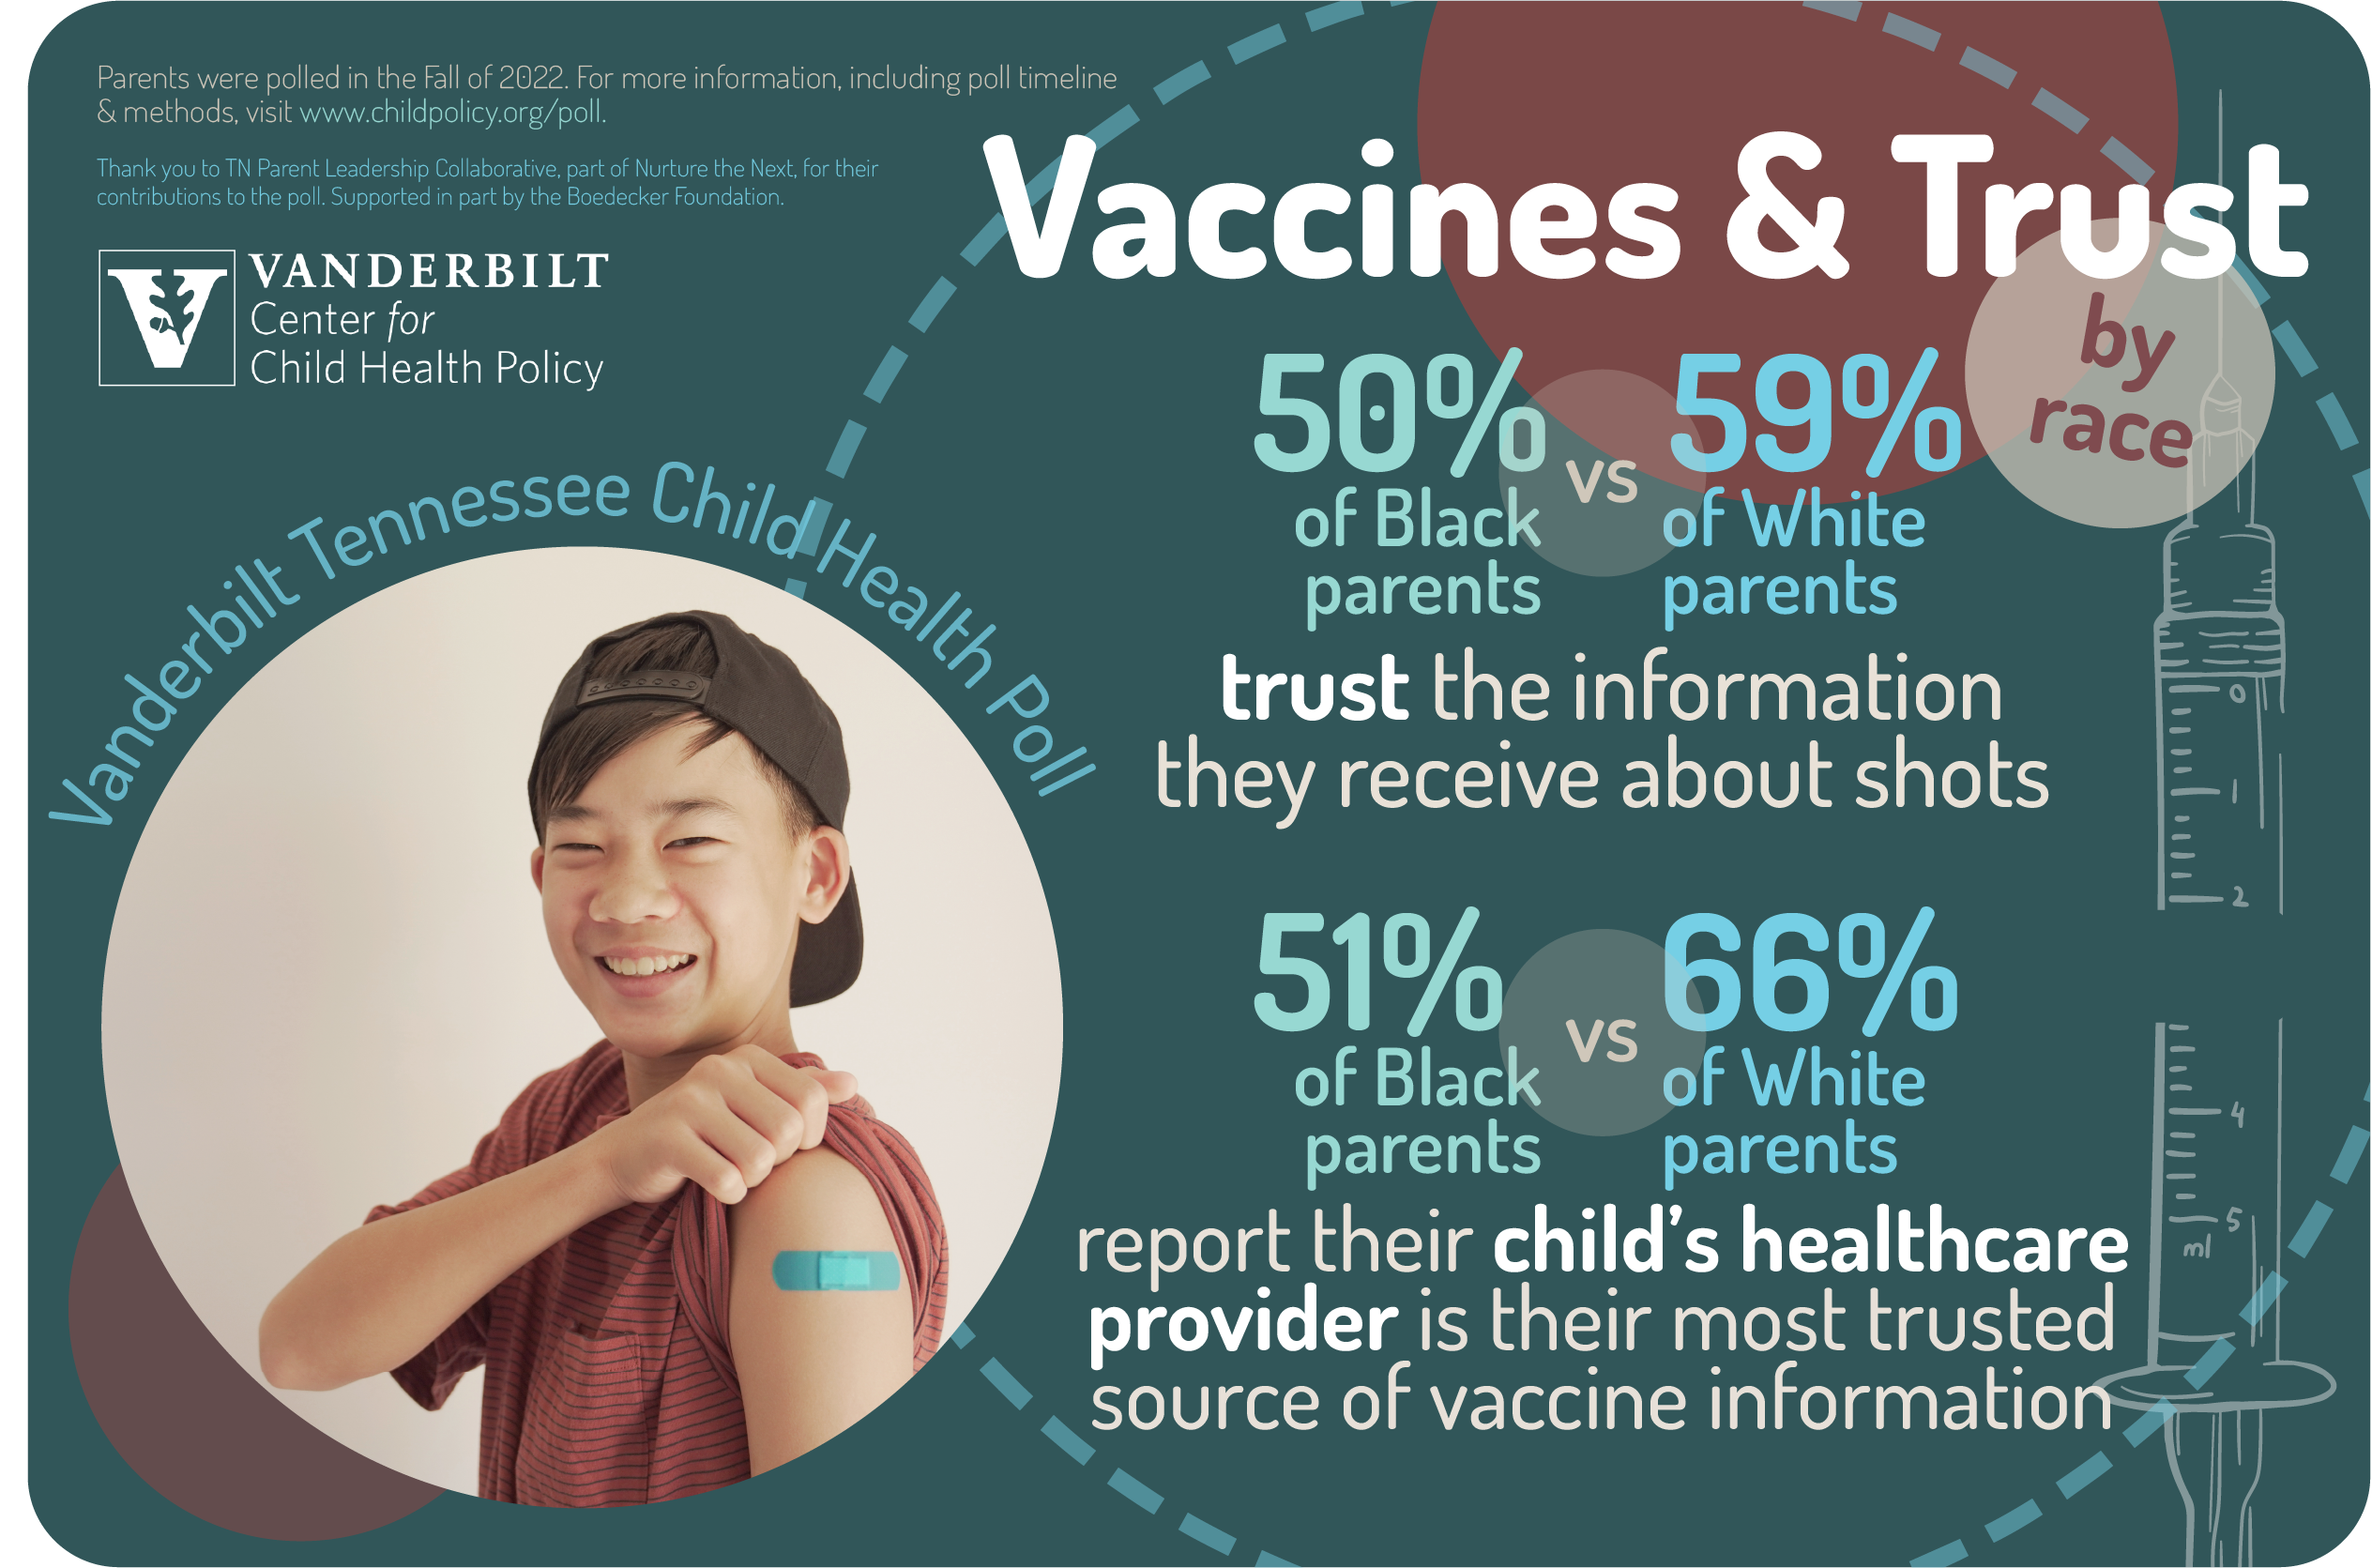 2022 Vaccines and Trust by Race